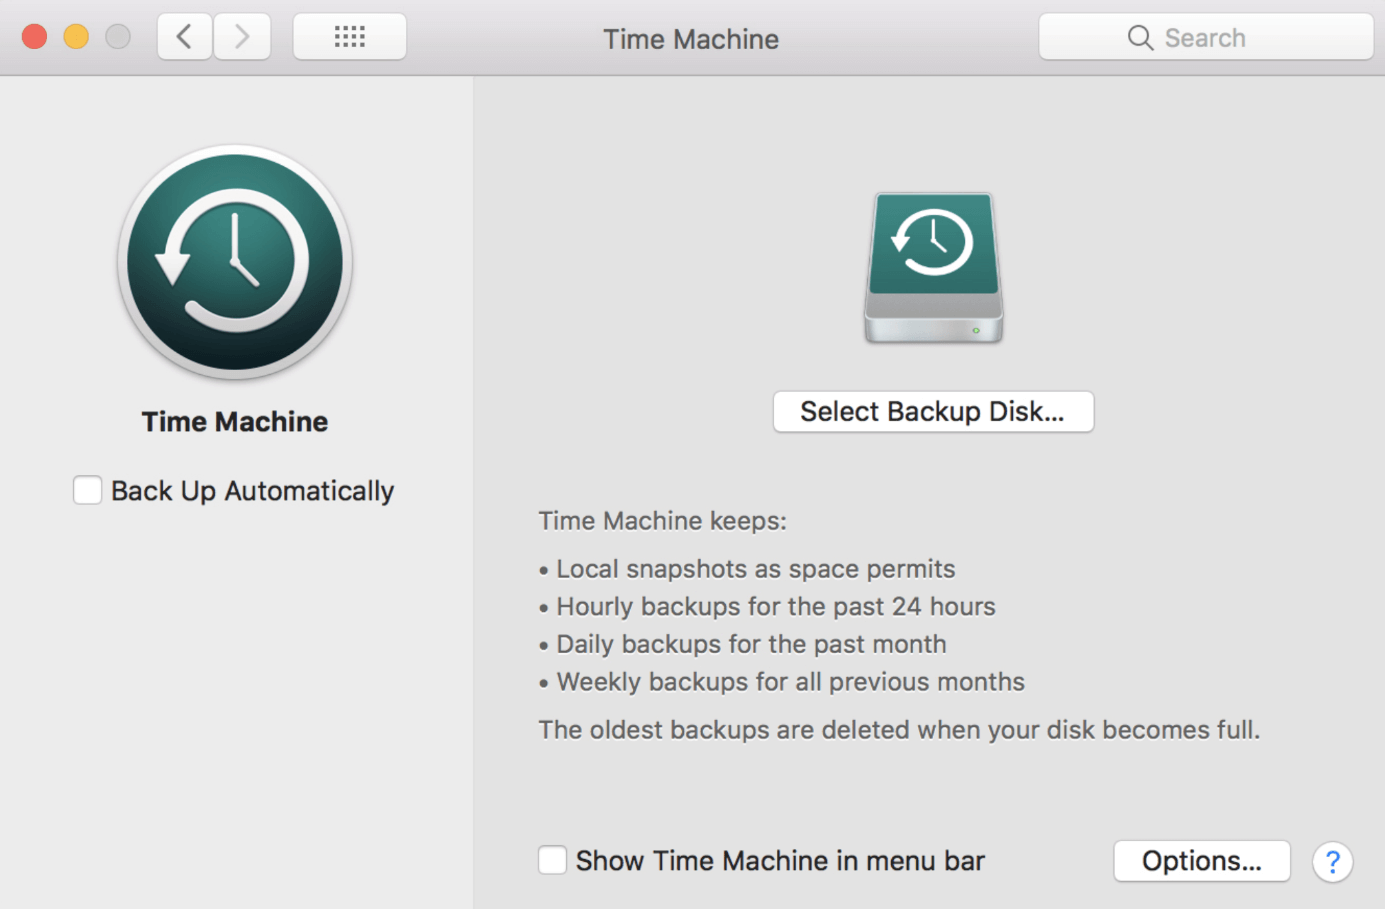 Time Machine: “Select Backup Disk” button 